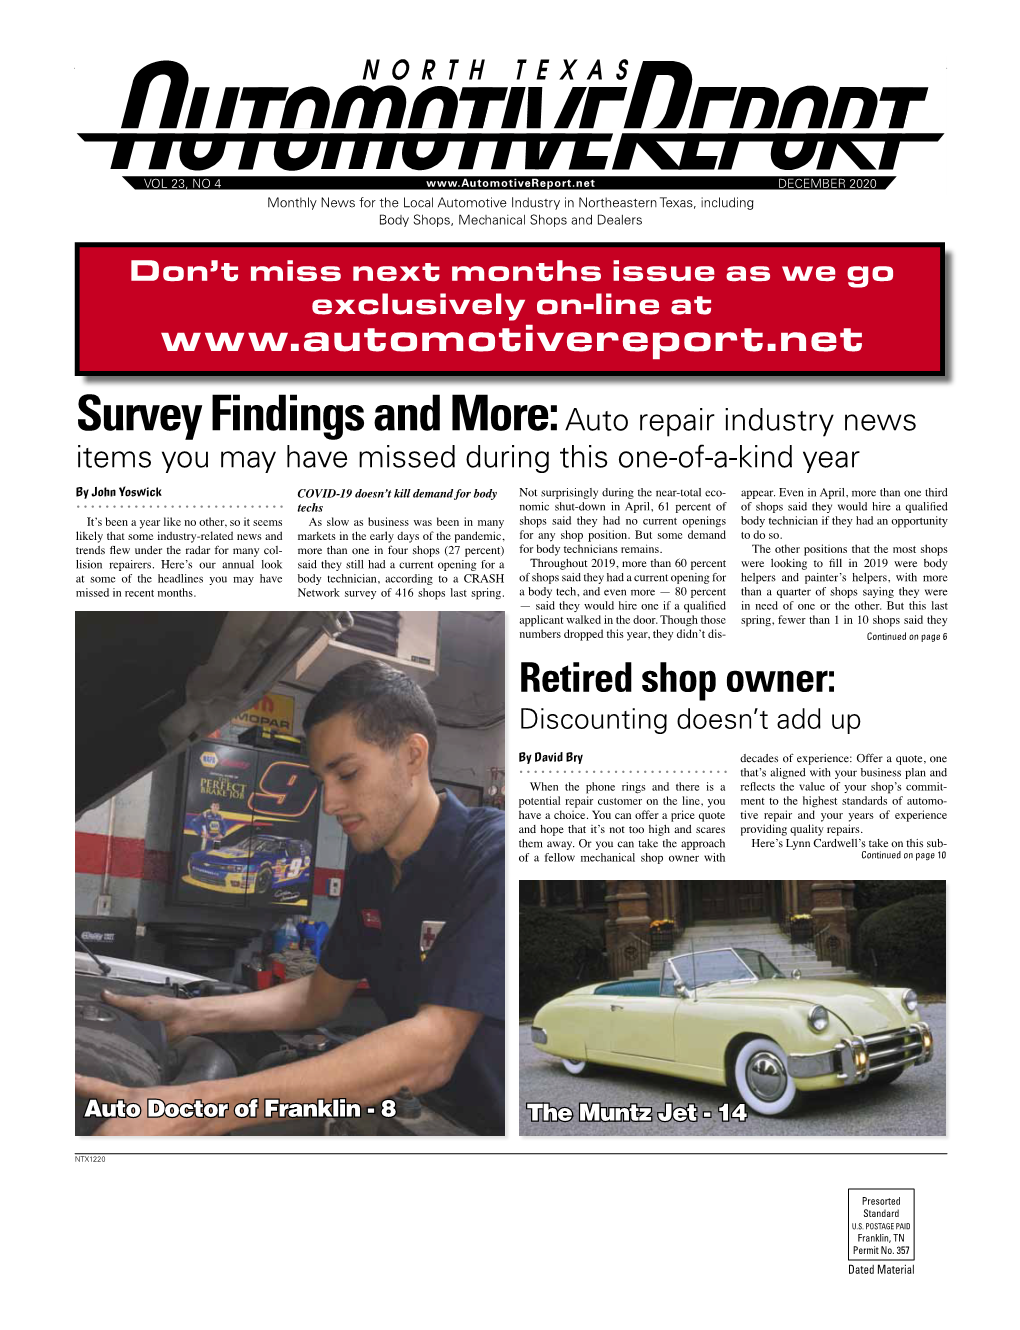 Survey Findings and More:Auto Repair Industry News